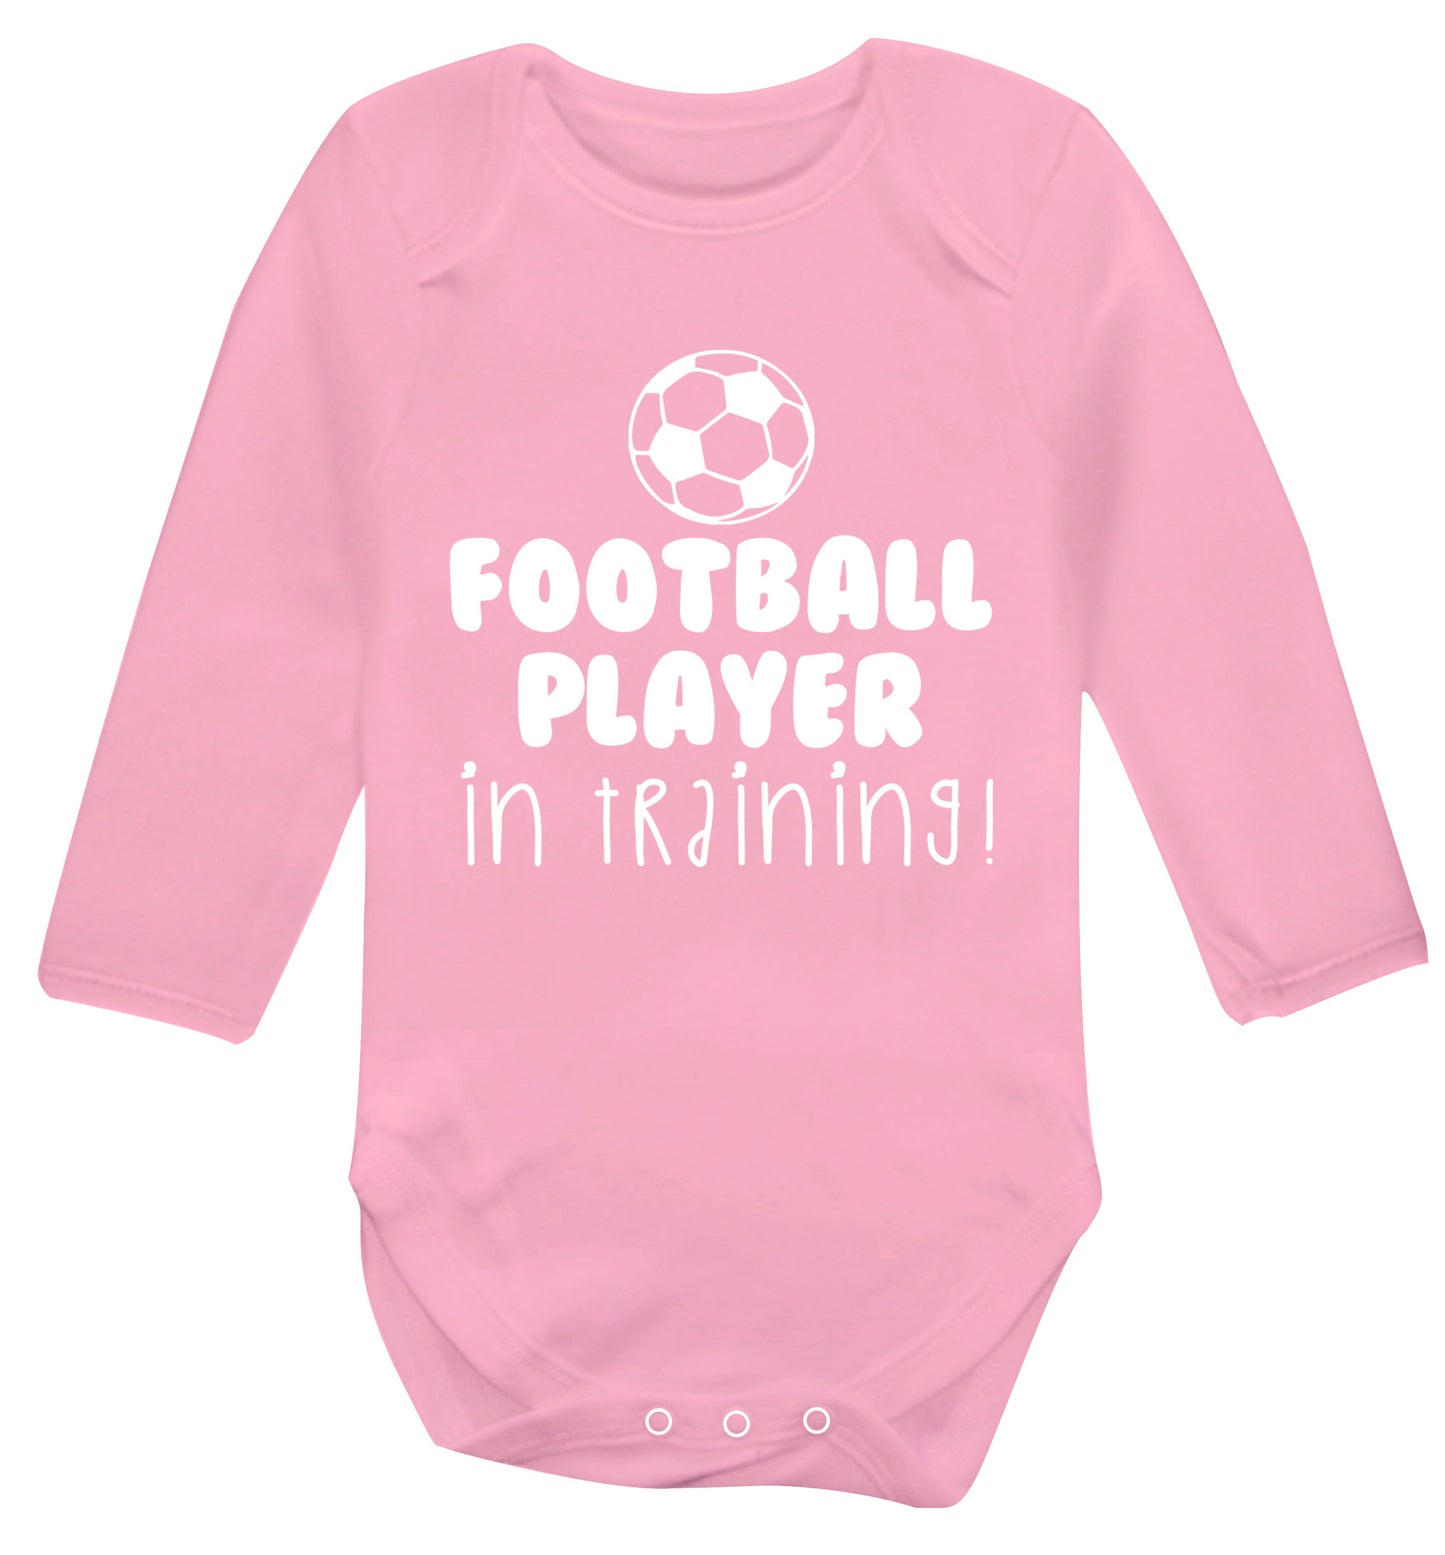 Football player in training Baby Vest long sleeved pale pink 6-12 months